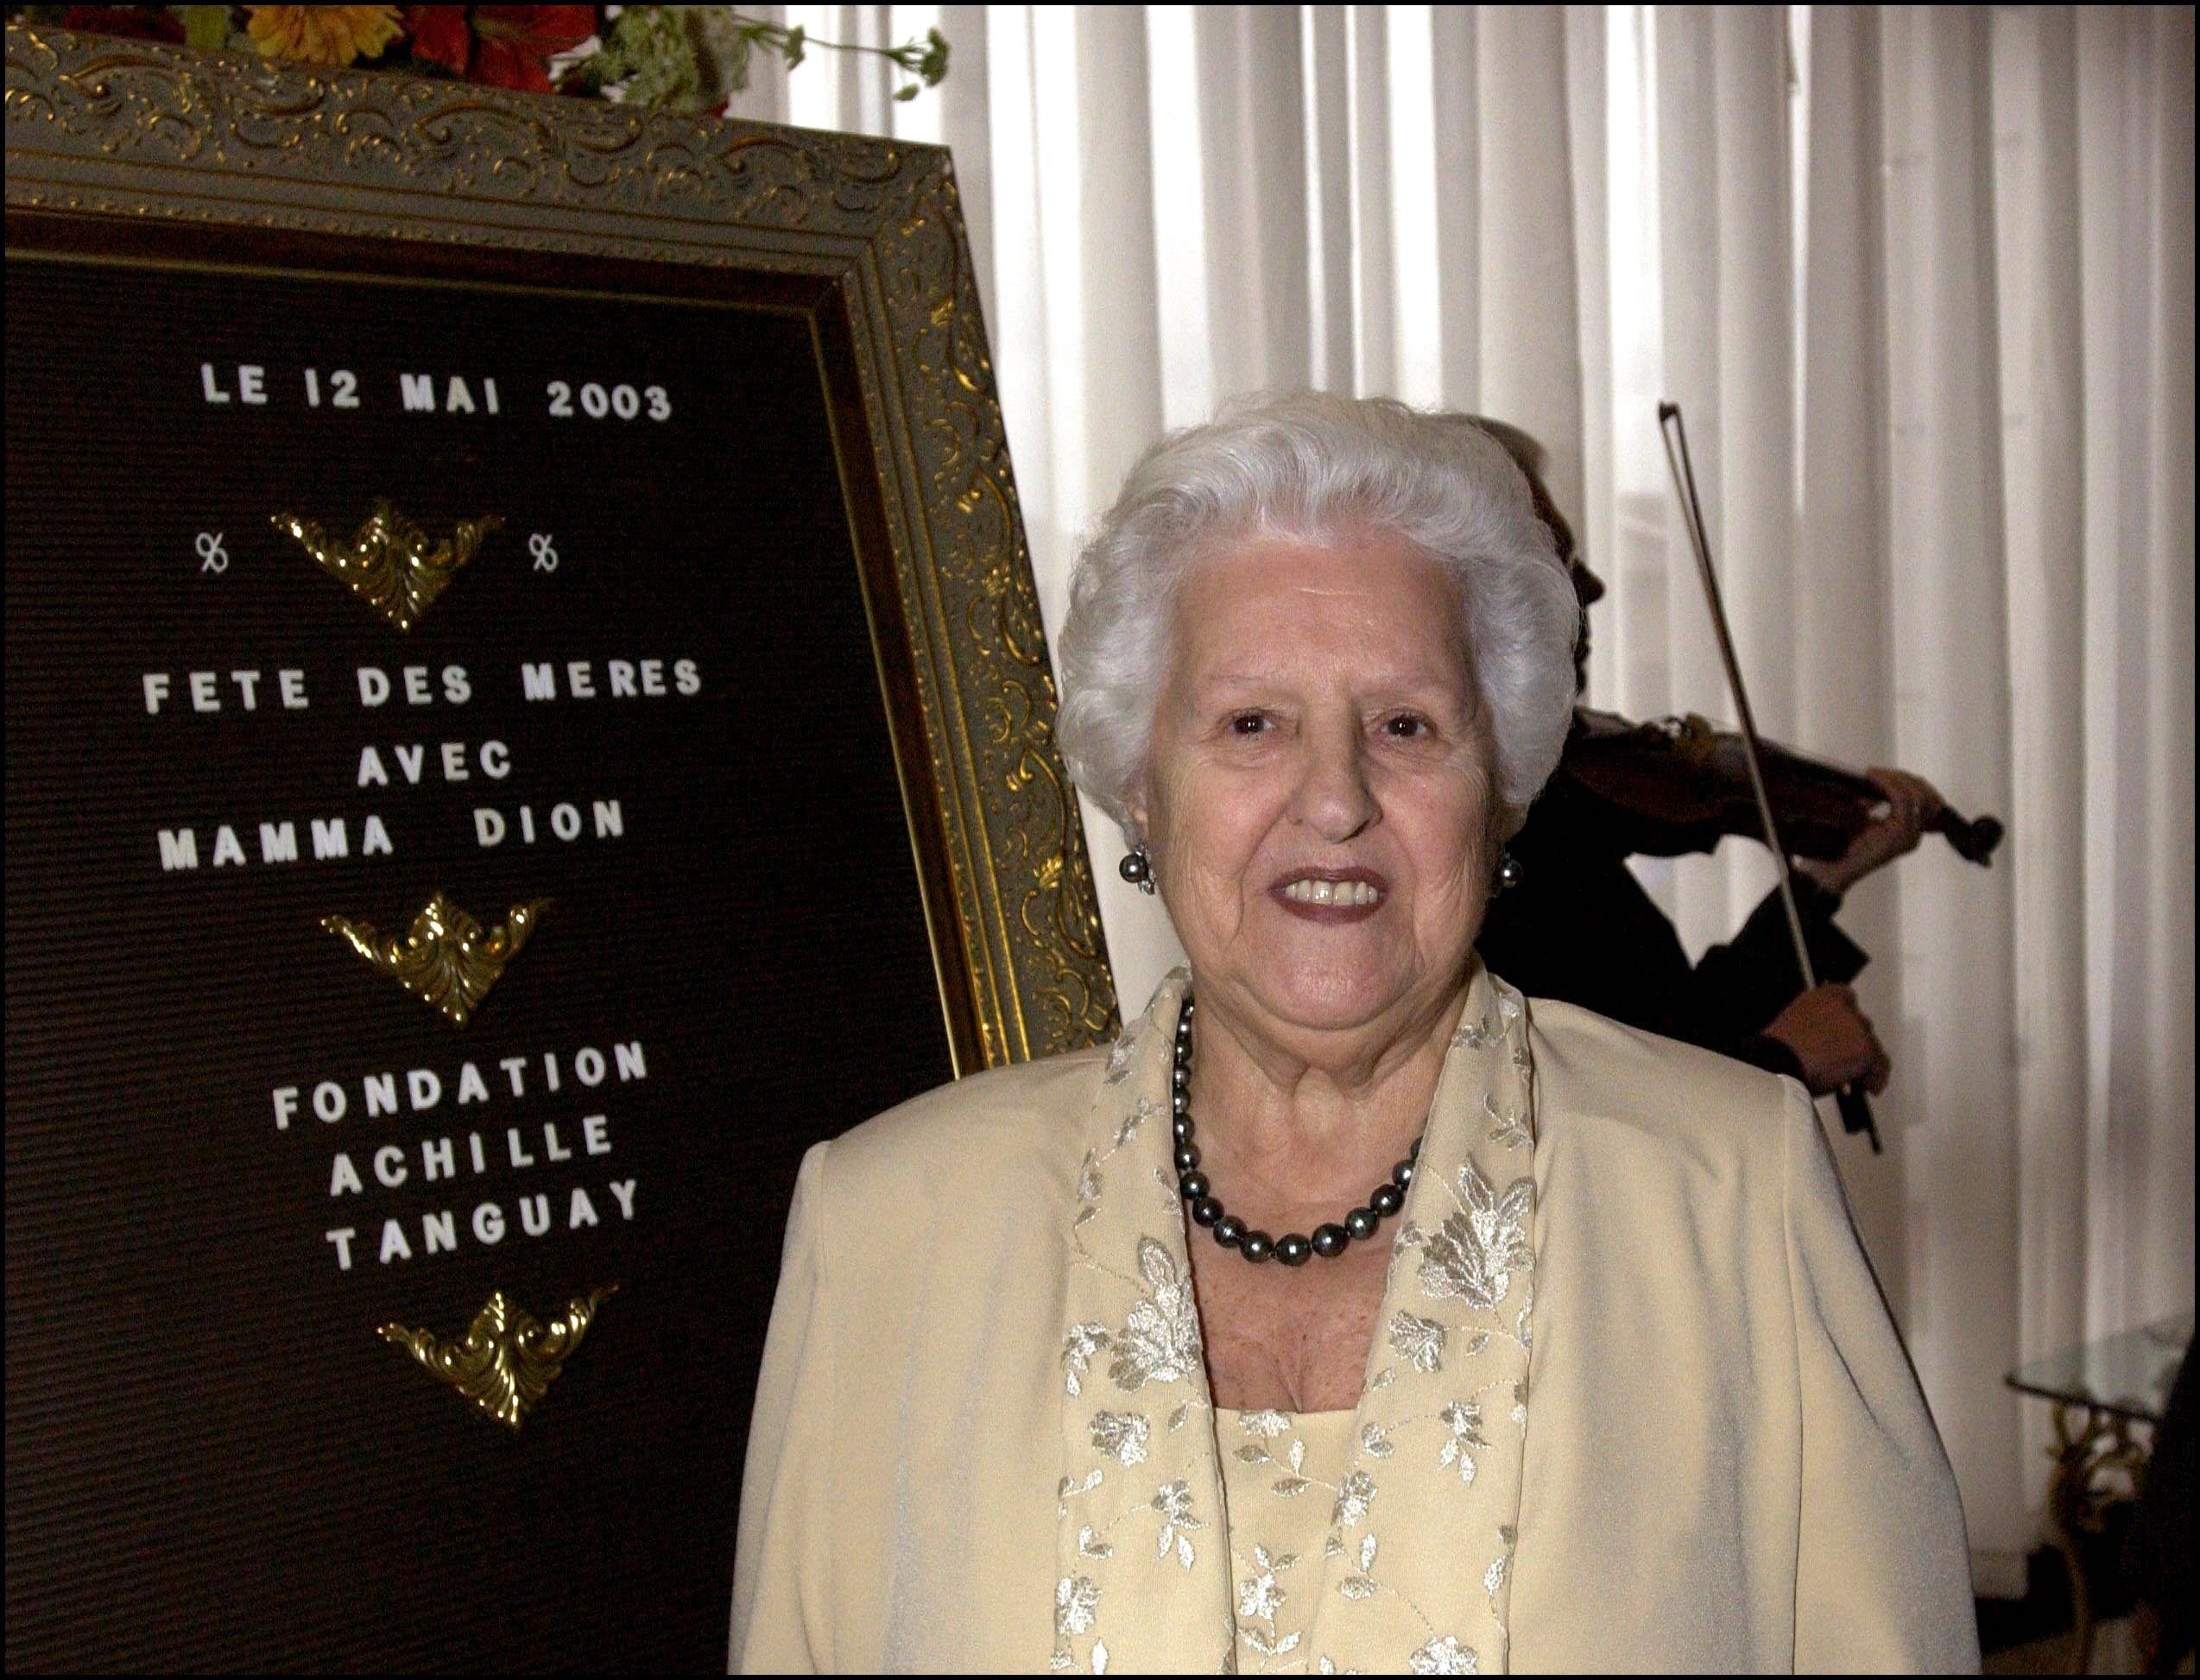  Celine Dion's mother Therese attends a benefit in Canada in 2003 | Source: Getty Images